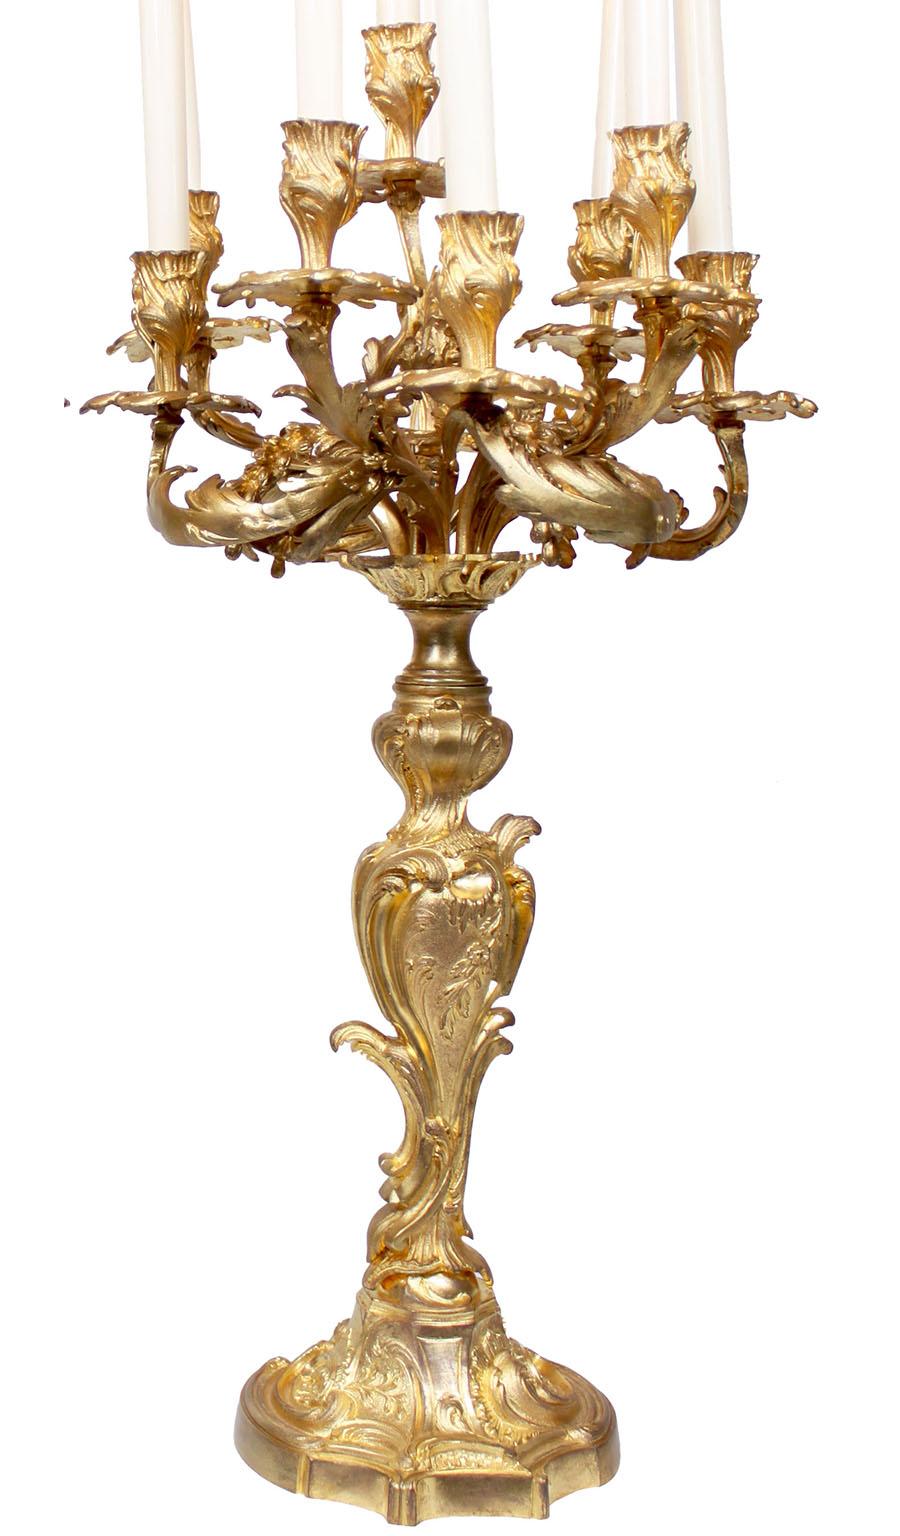 A Pair of French 19th Century Louis XV Style Gilt-Bronze Nine-Light Candelabra In Good Condition For Sale In Los Angeles, CA